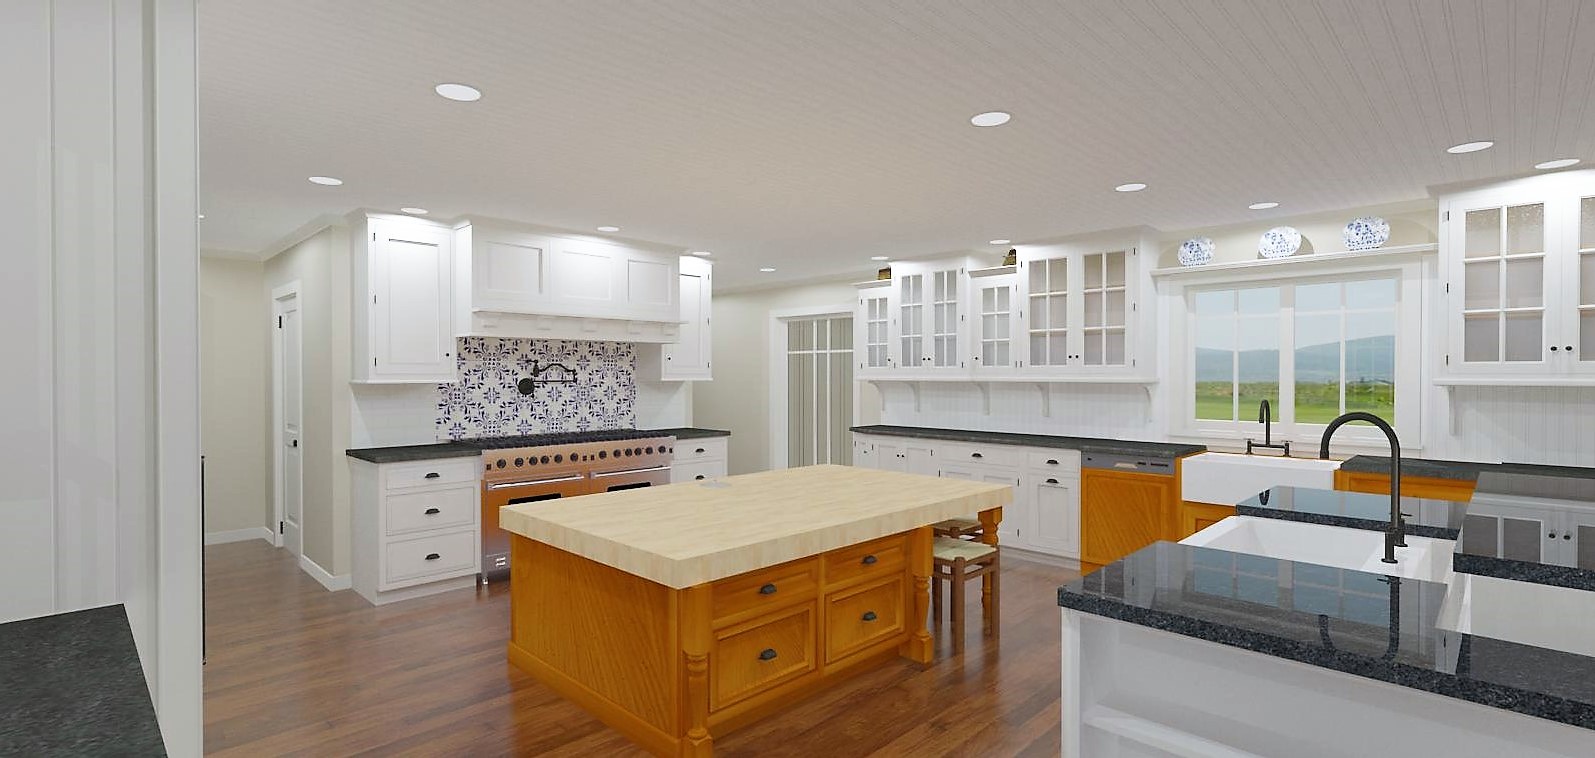 Photos Kosher Kitchens That Prove Why Doubles Are Trendy Sheknows